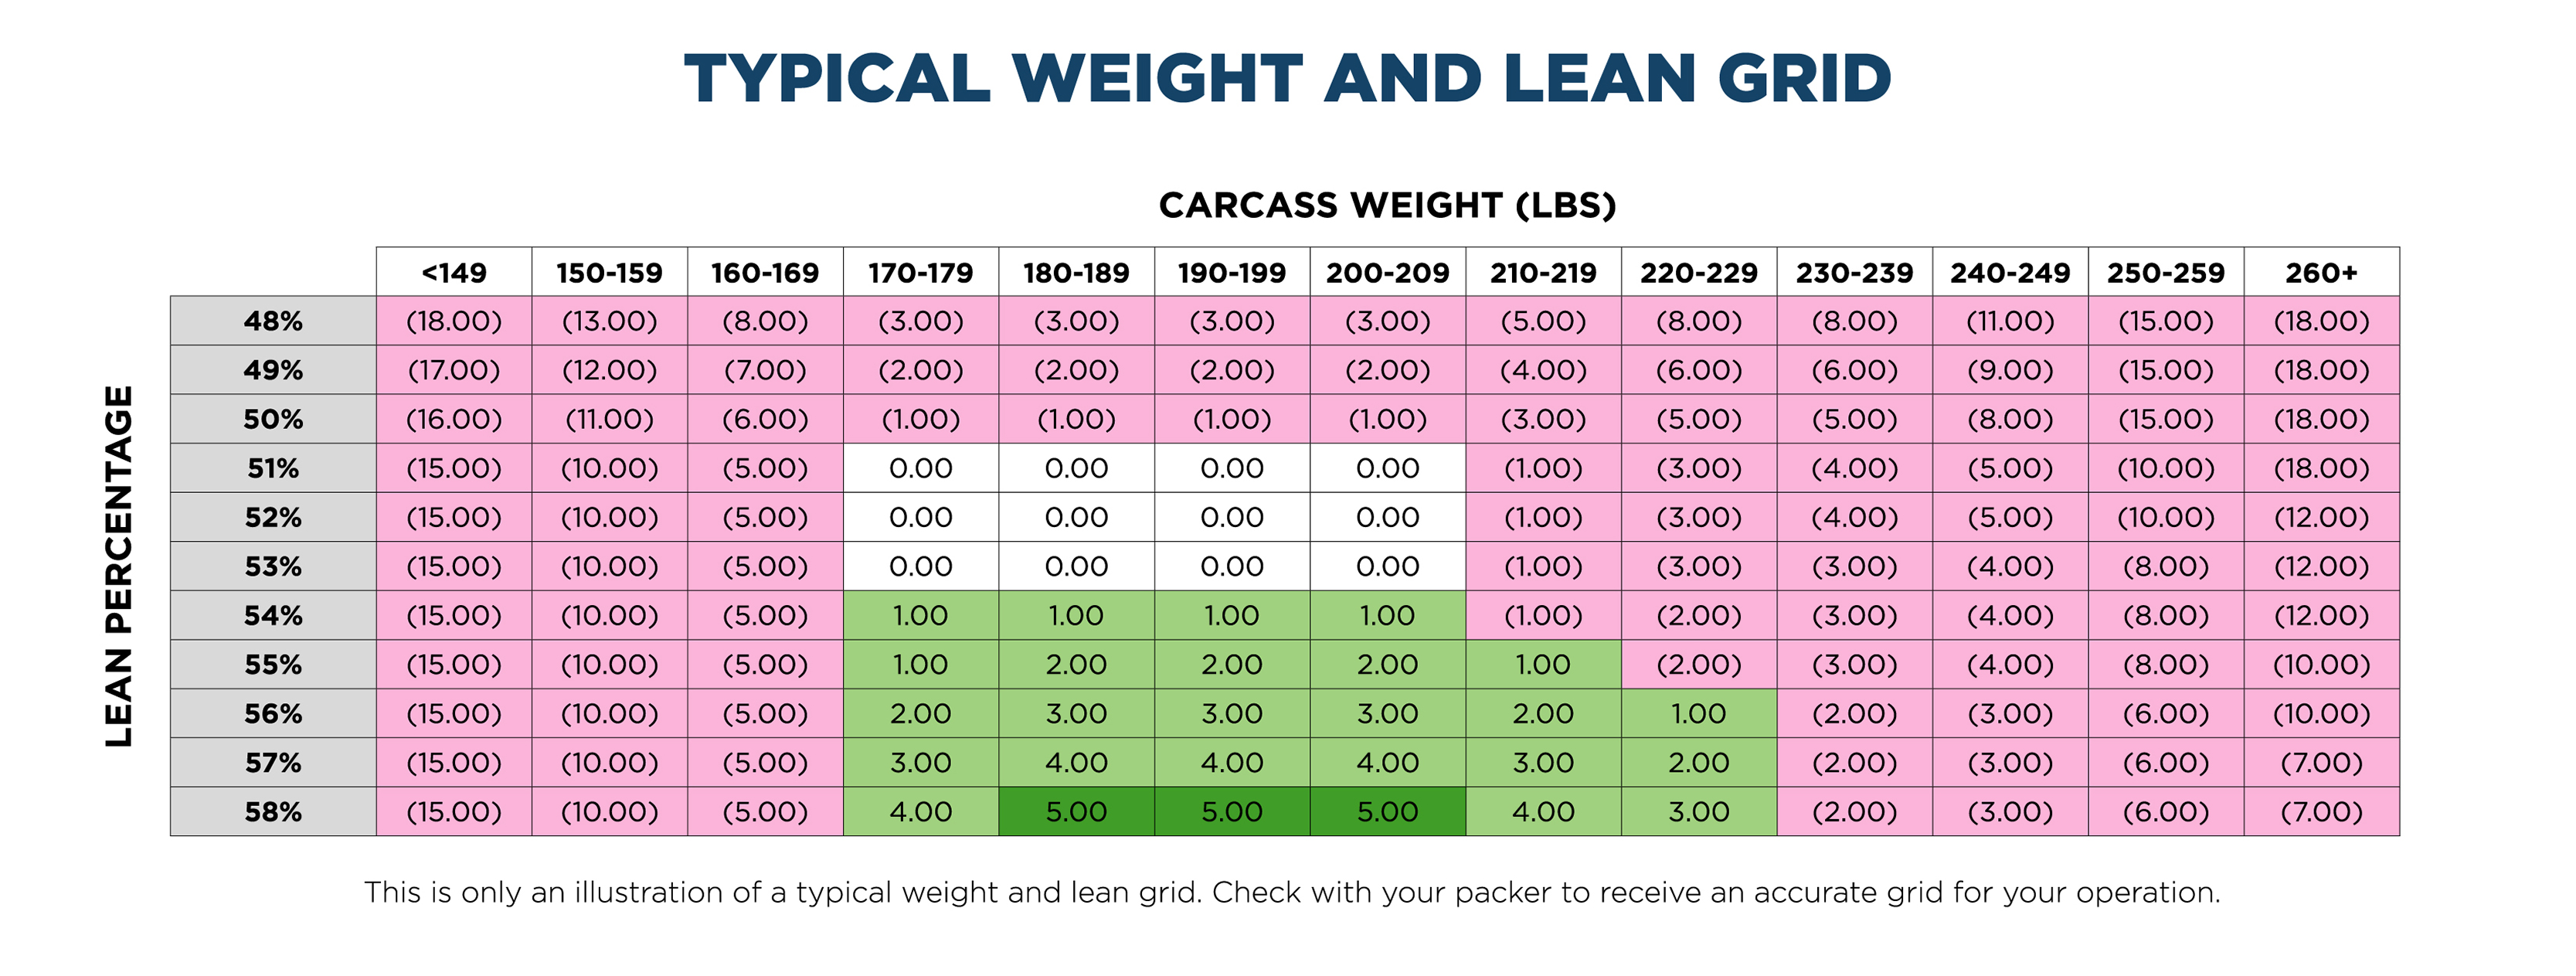 Typical Weight and Lean Grid